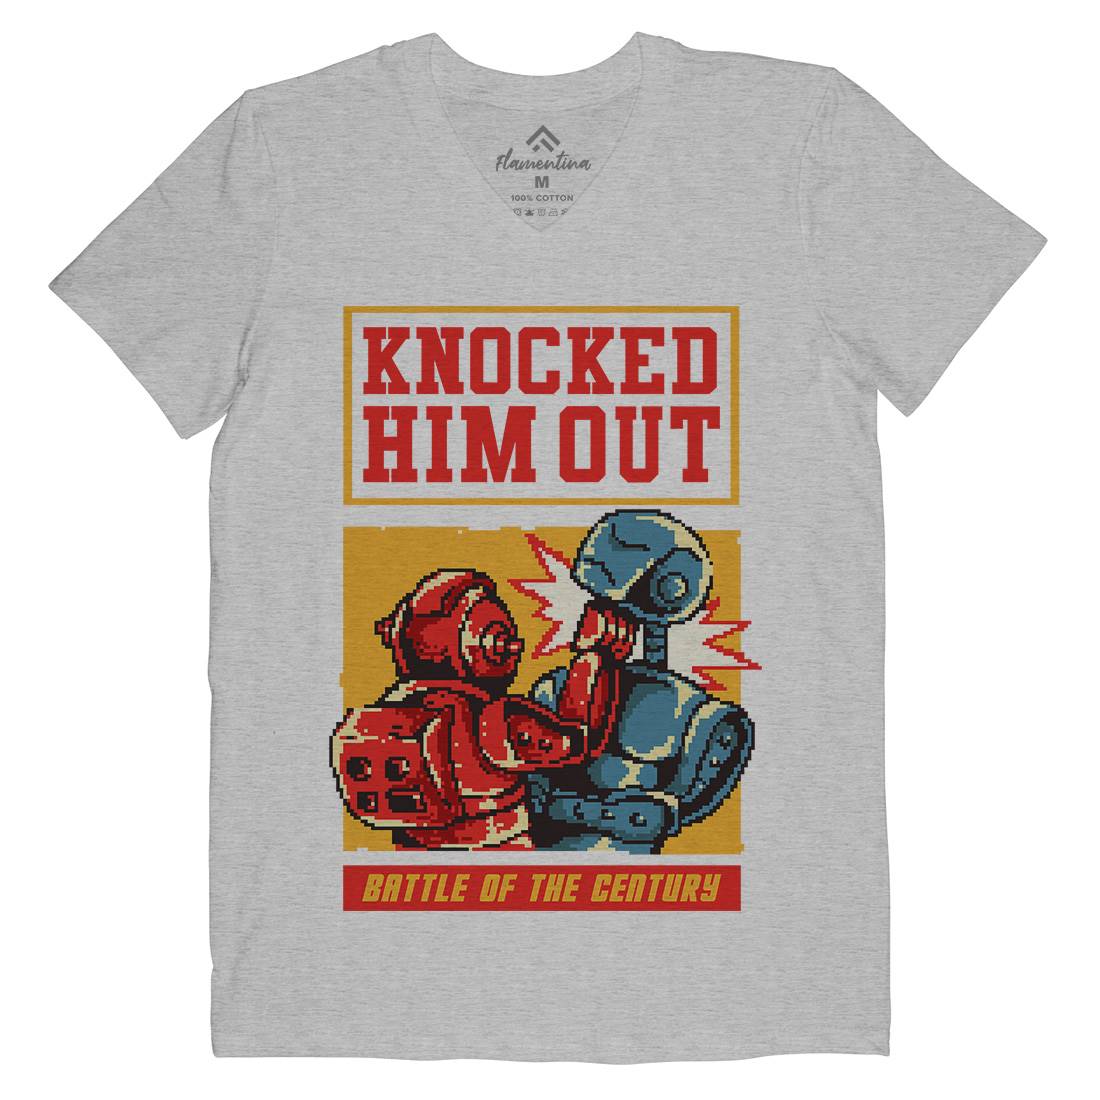 Knocked Him Out Mens V-Neck T-Shirt Space B923